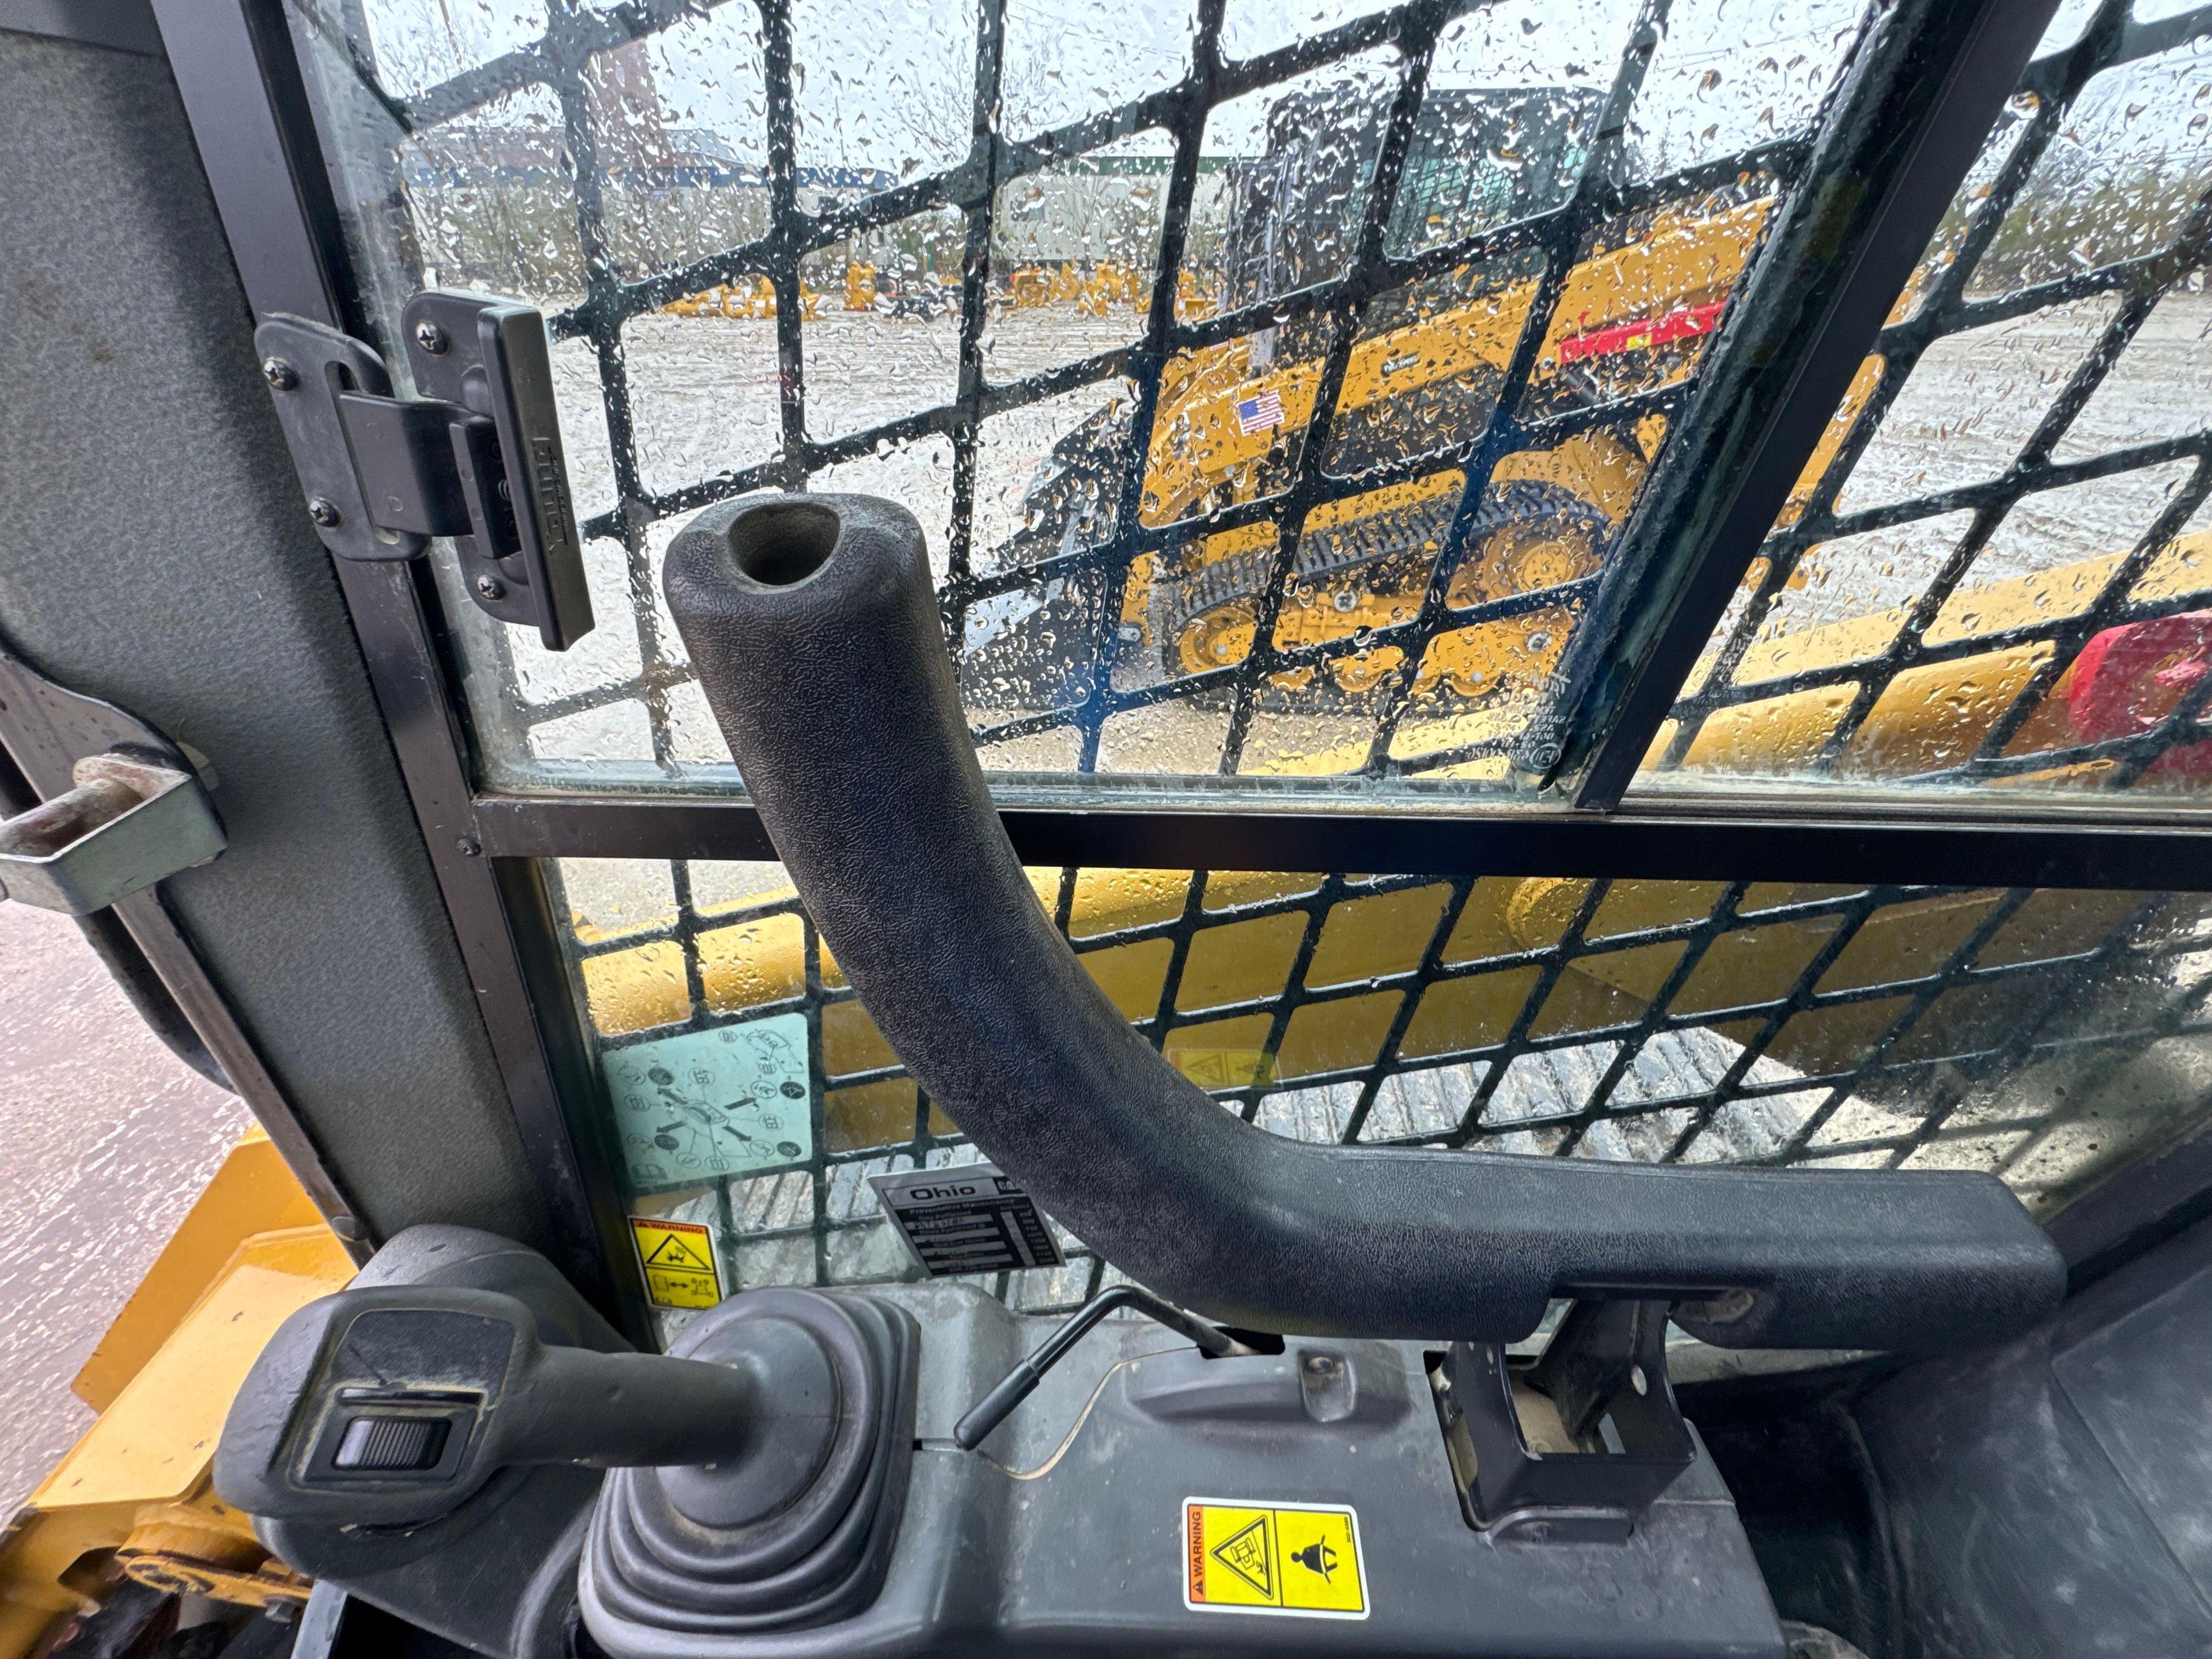 2018 CAT 289D RUBBER TRACKED SKID STEER SN:TAW10806 powered by Cat diesel engine, equipped with